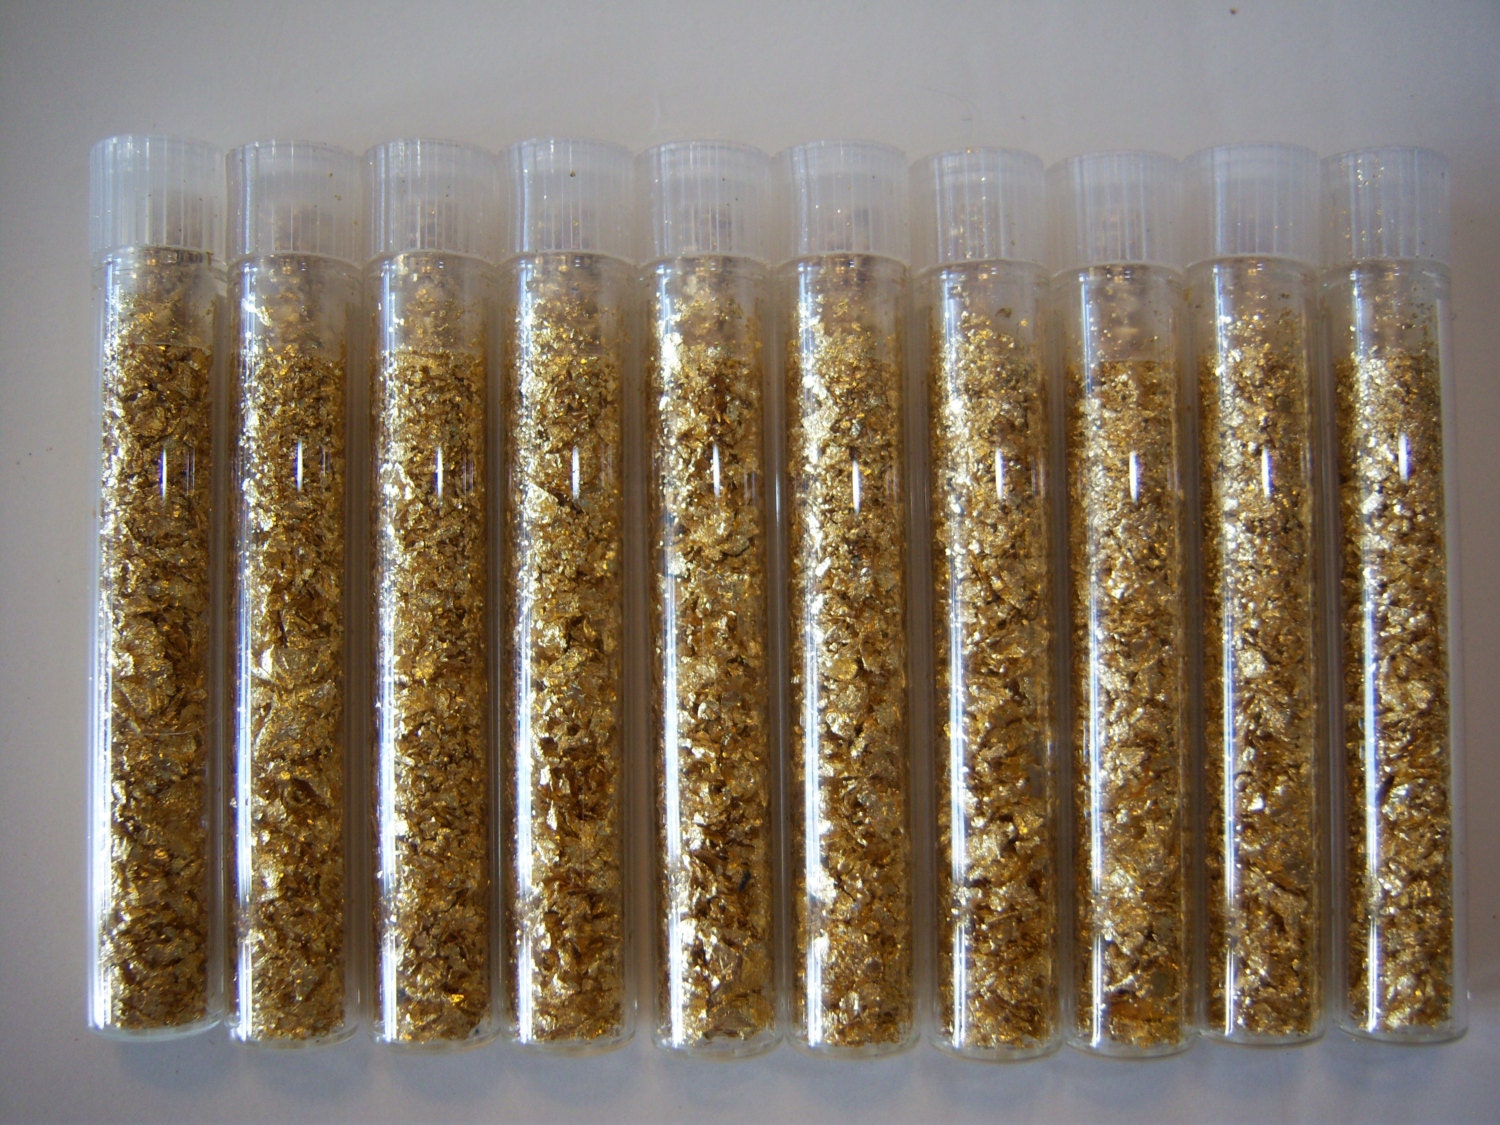 Real Gold Flakes in Glass Vial - Kids Love Rocks